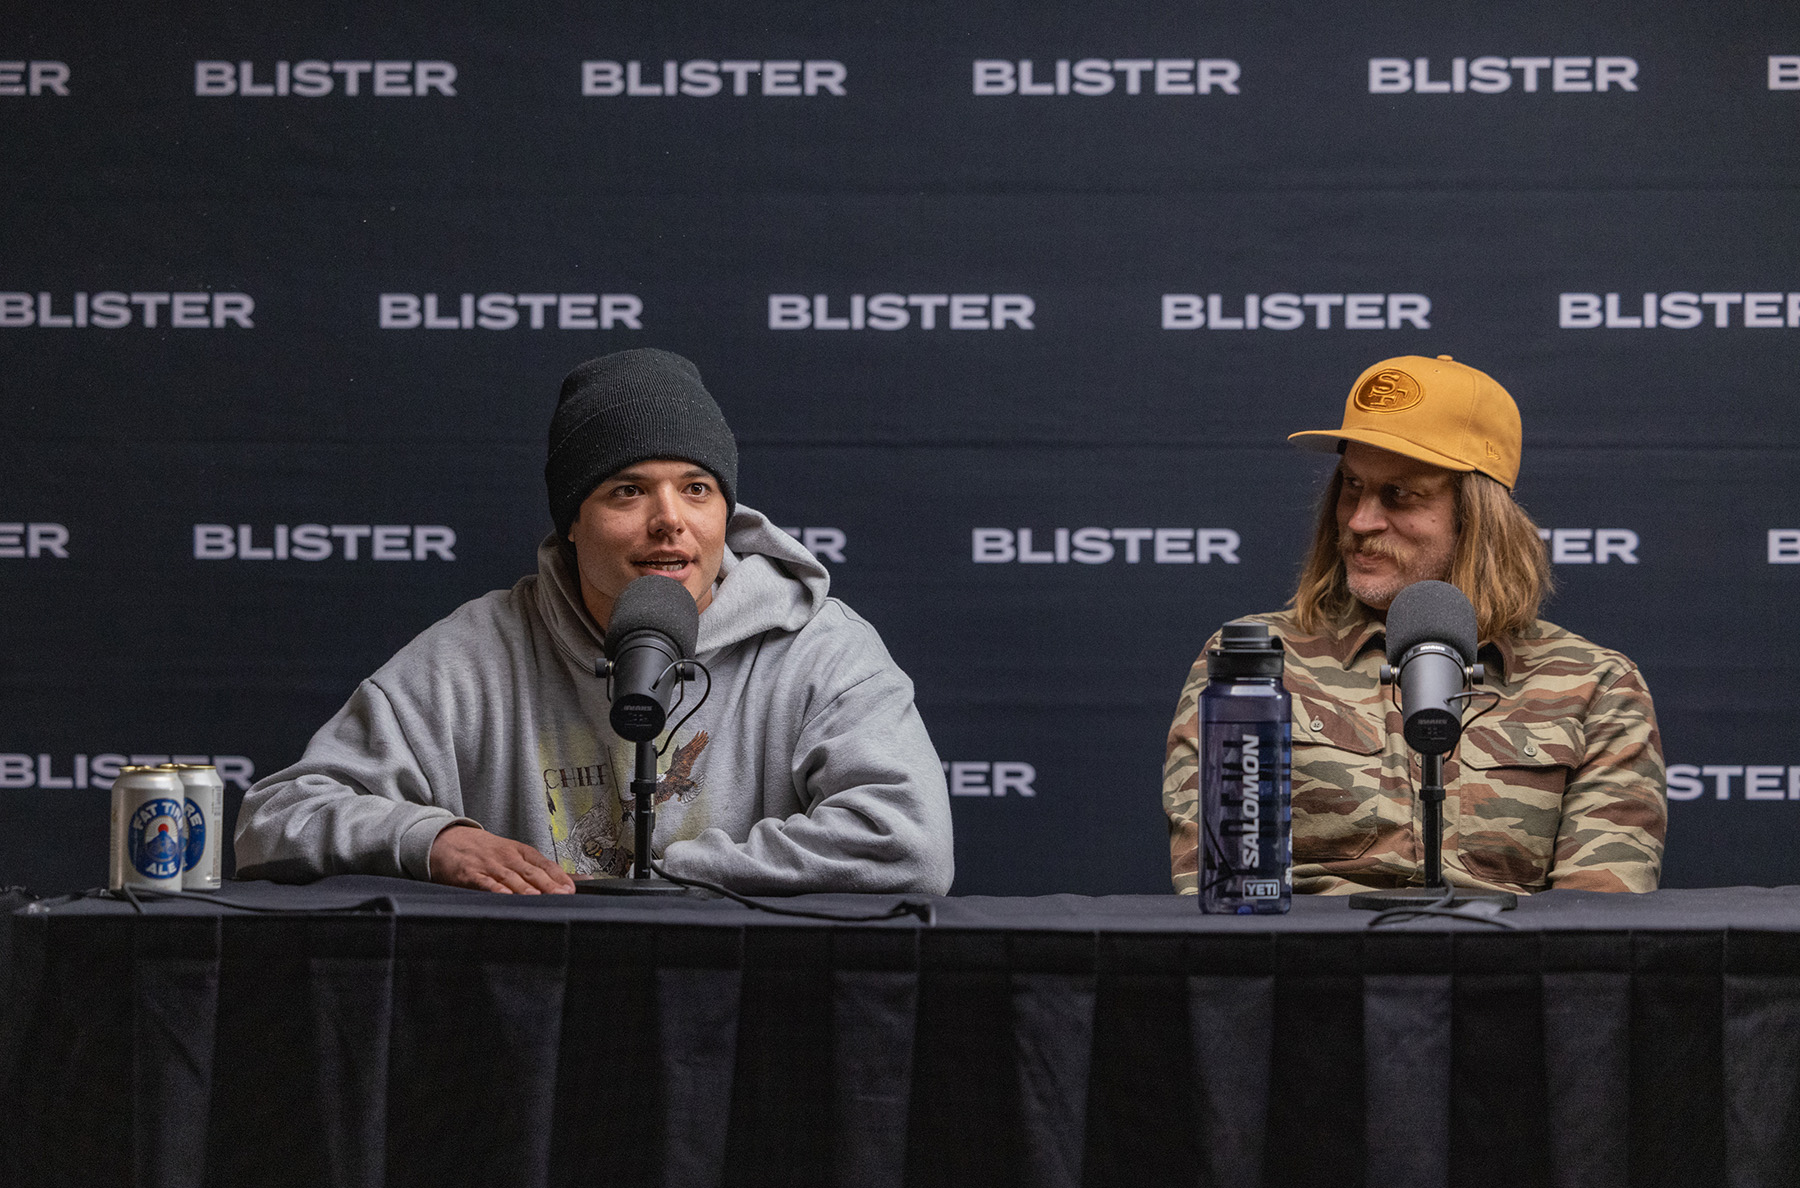 On our latest Blister Podcast, we’re airing a conversation from our Blister Summit where Trevor Kennison, Teton Brown, Cody Townsend, & Hoji swap stories about their experiences in the mountains & more.